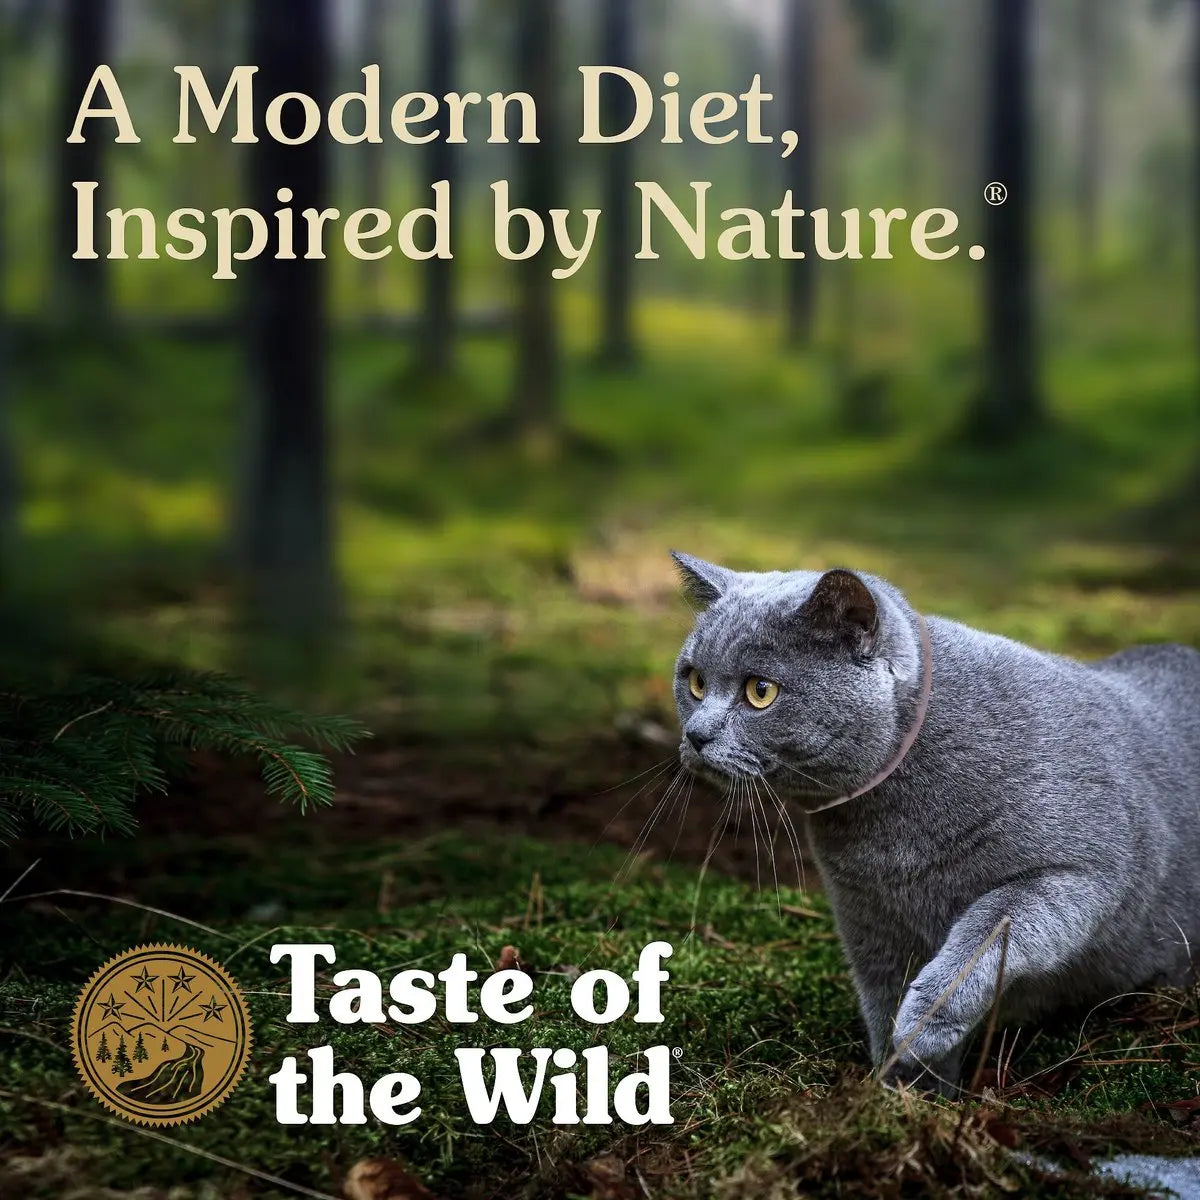 Taste of the Wild® Canyon River® Grain Free Feline With Trout & Smoked Salmon Recipe Cat Food Taste of the Wild®